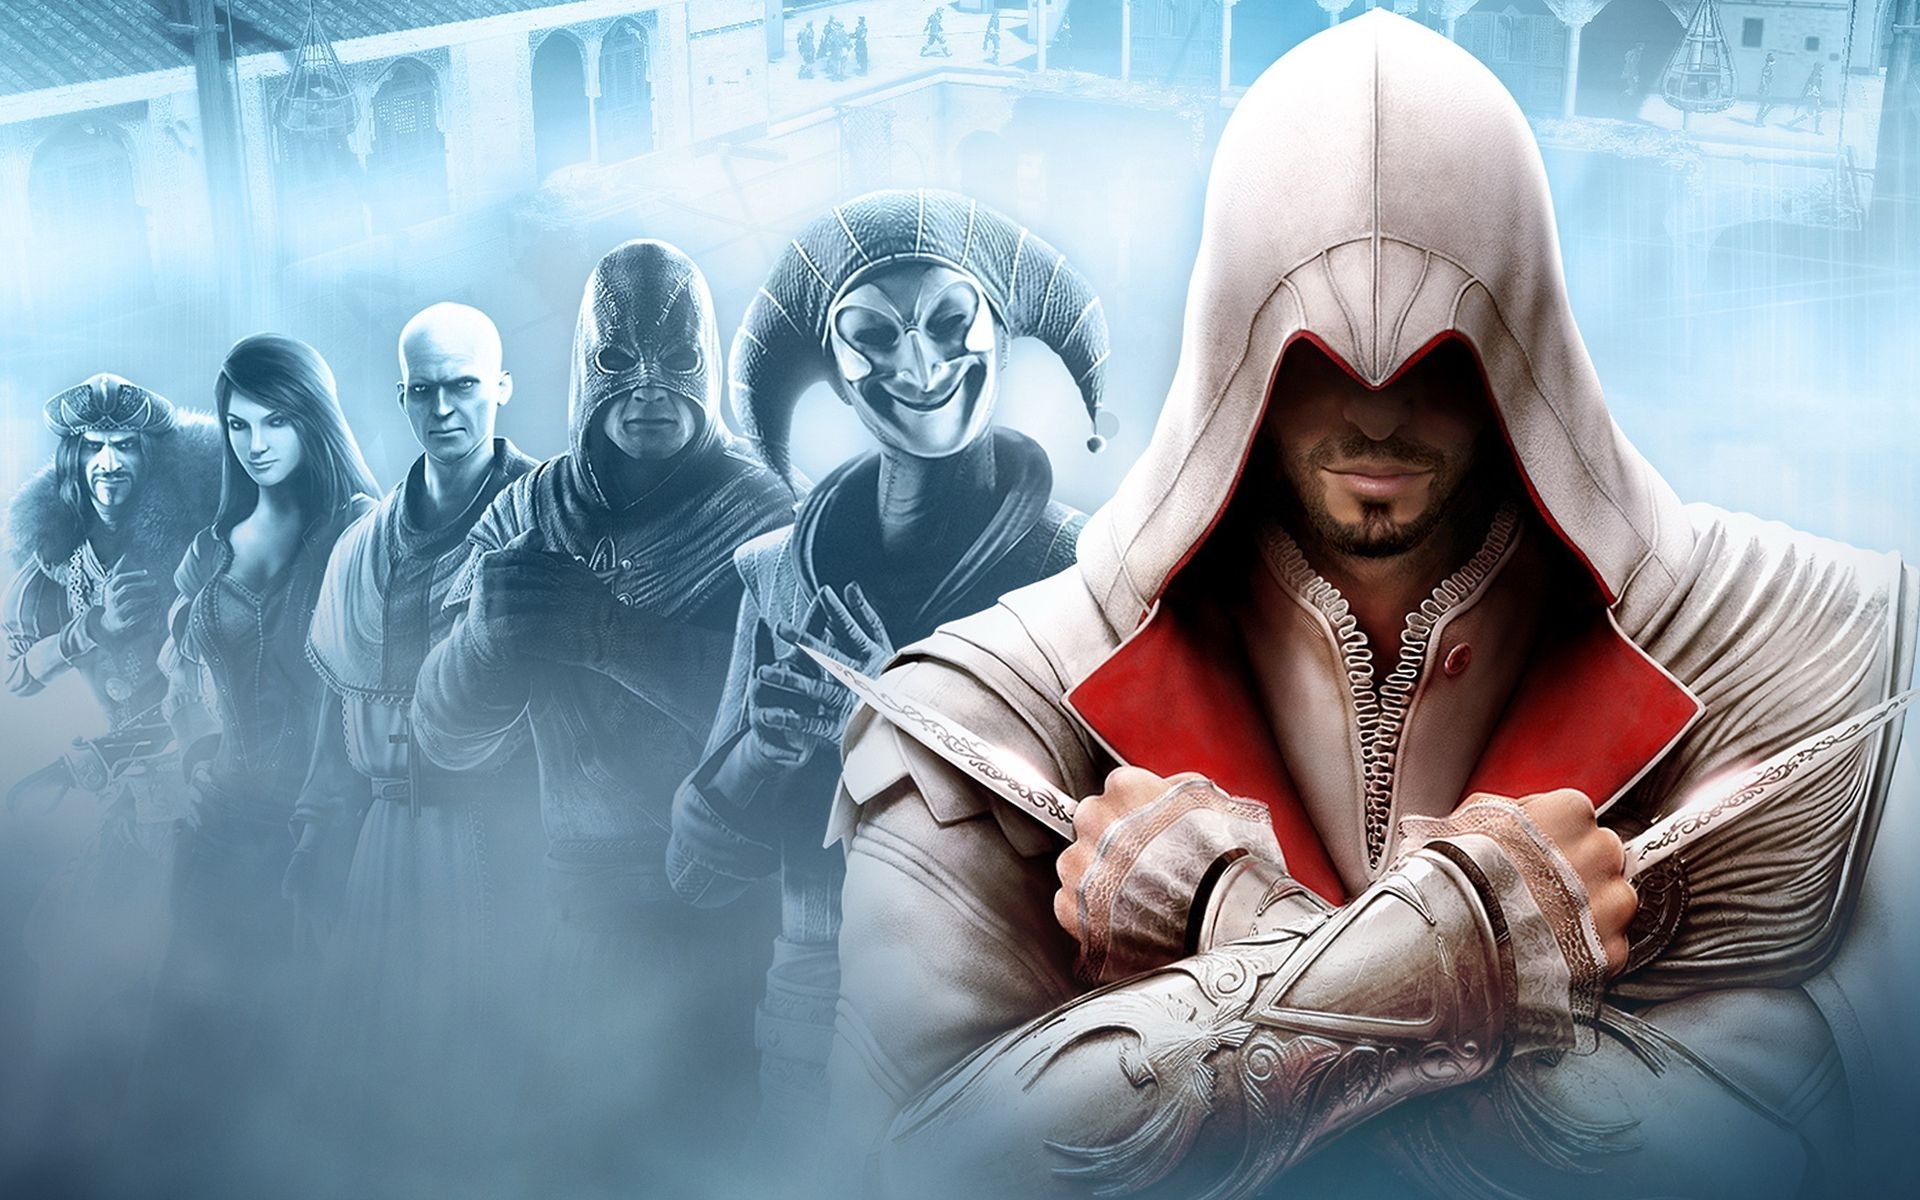 Download background games, assassin's creed